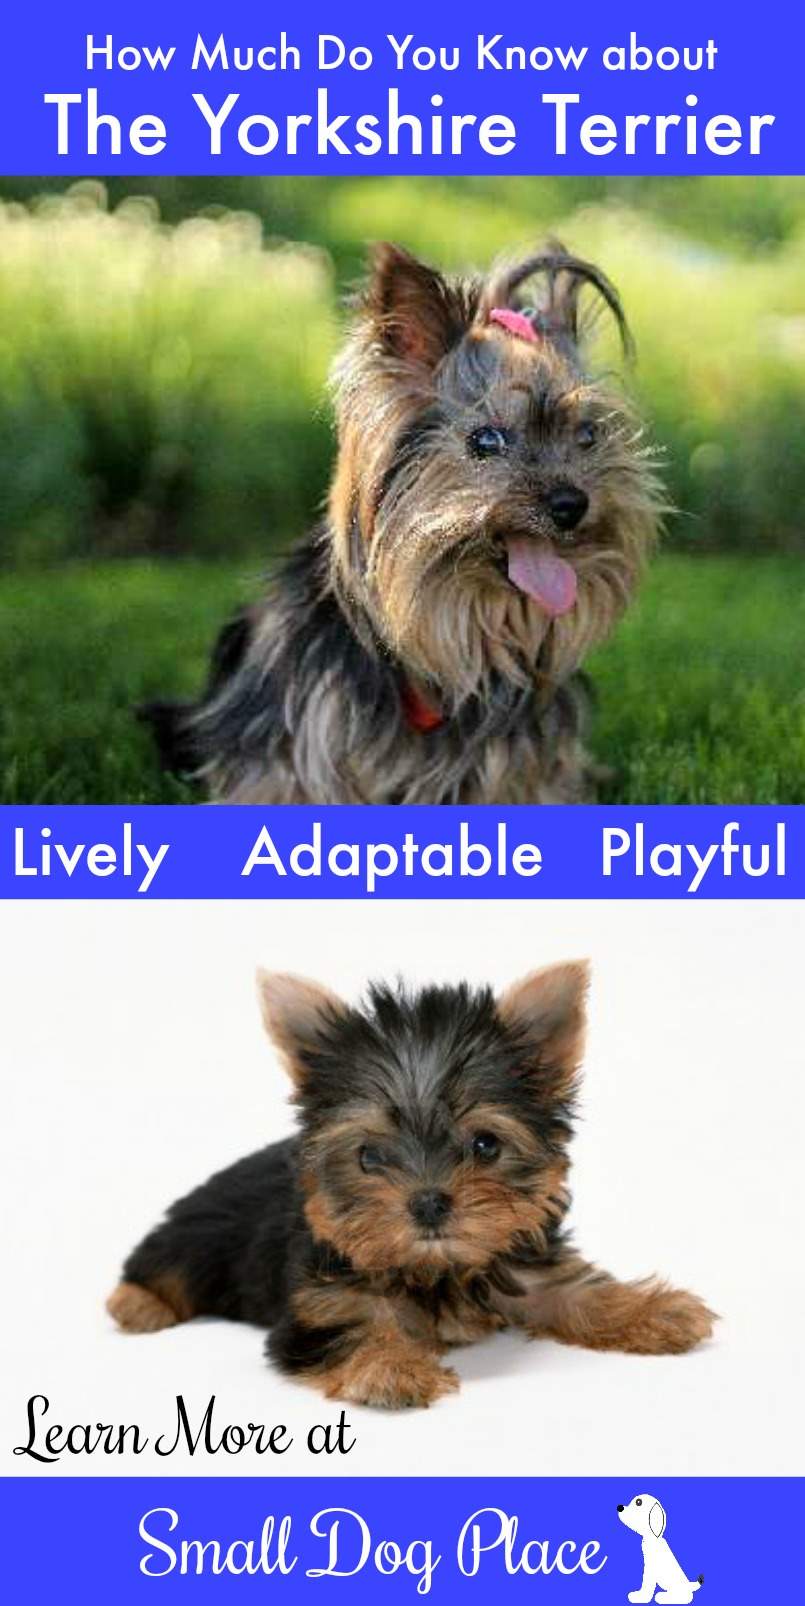 The Yorkshire Terrier (Yorkie) Complete Dog Profile Article